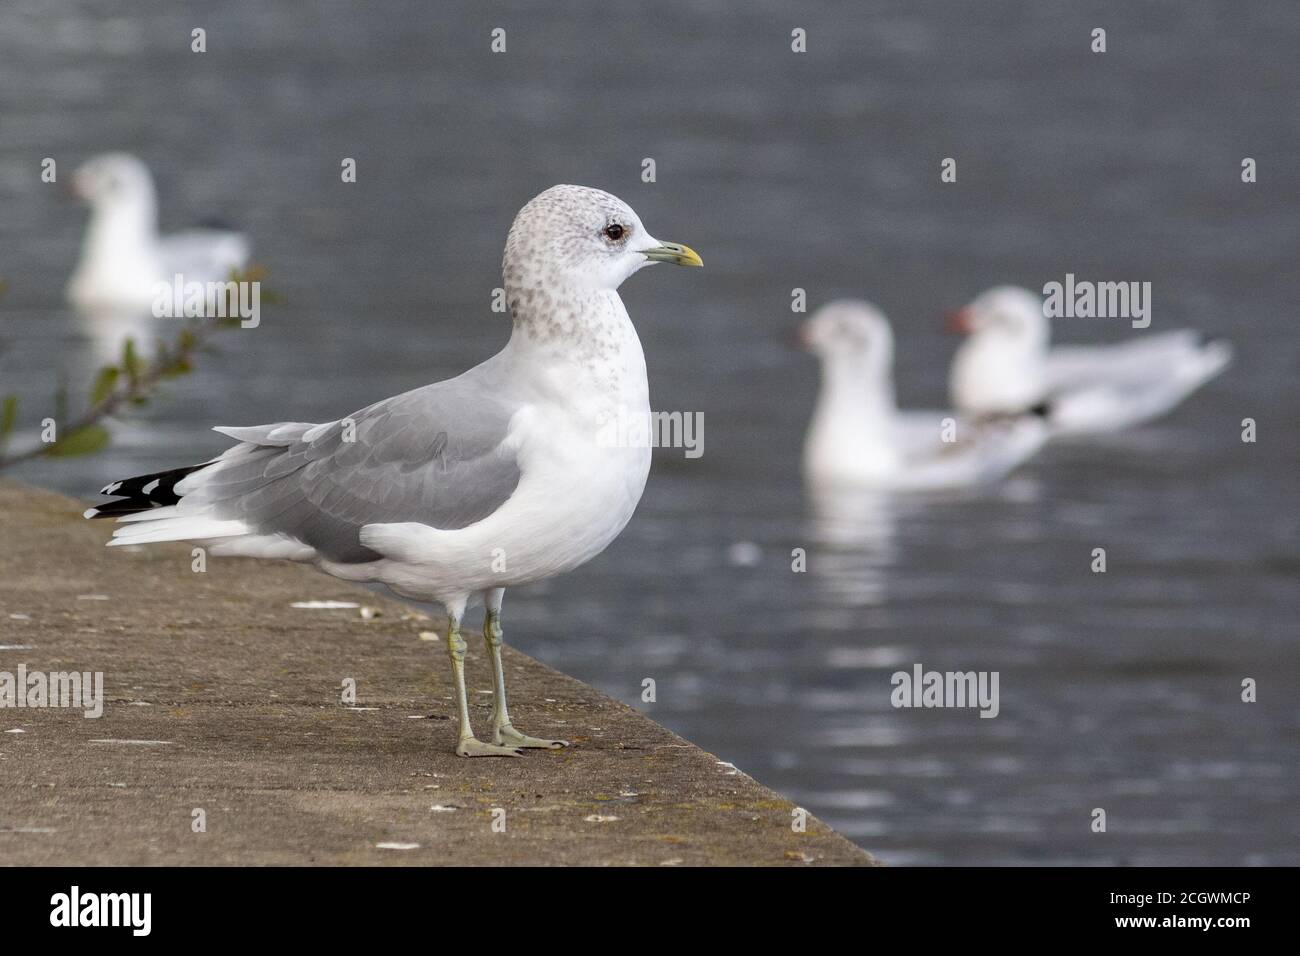 Profile of Adult Common Gull in Non-Breeding Plumage Standing Stock Photo